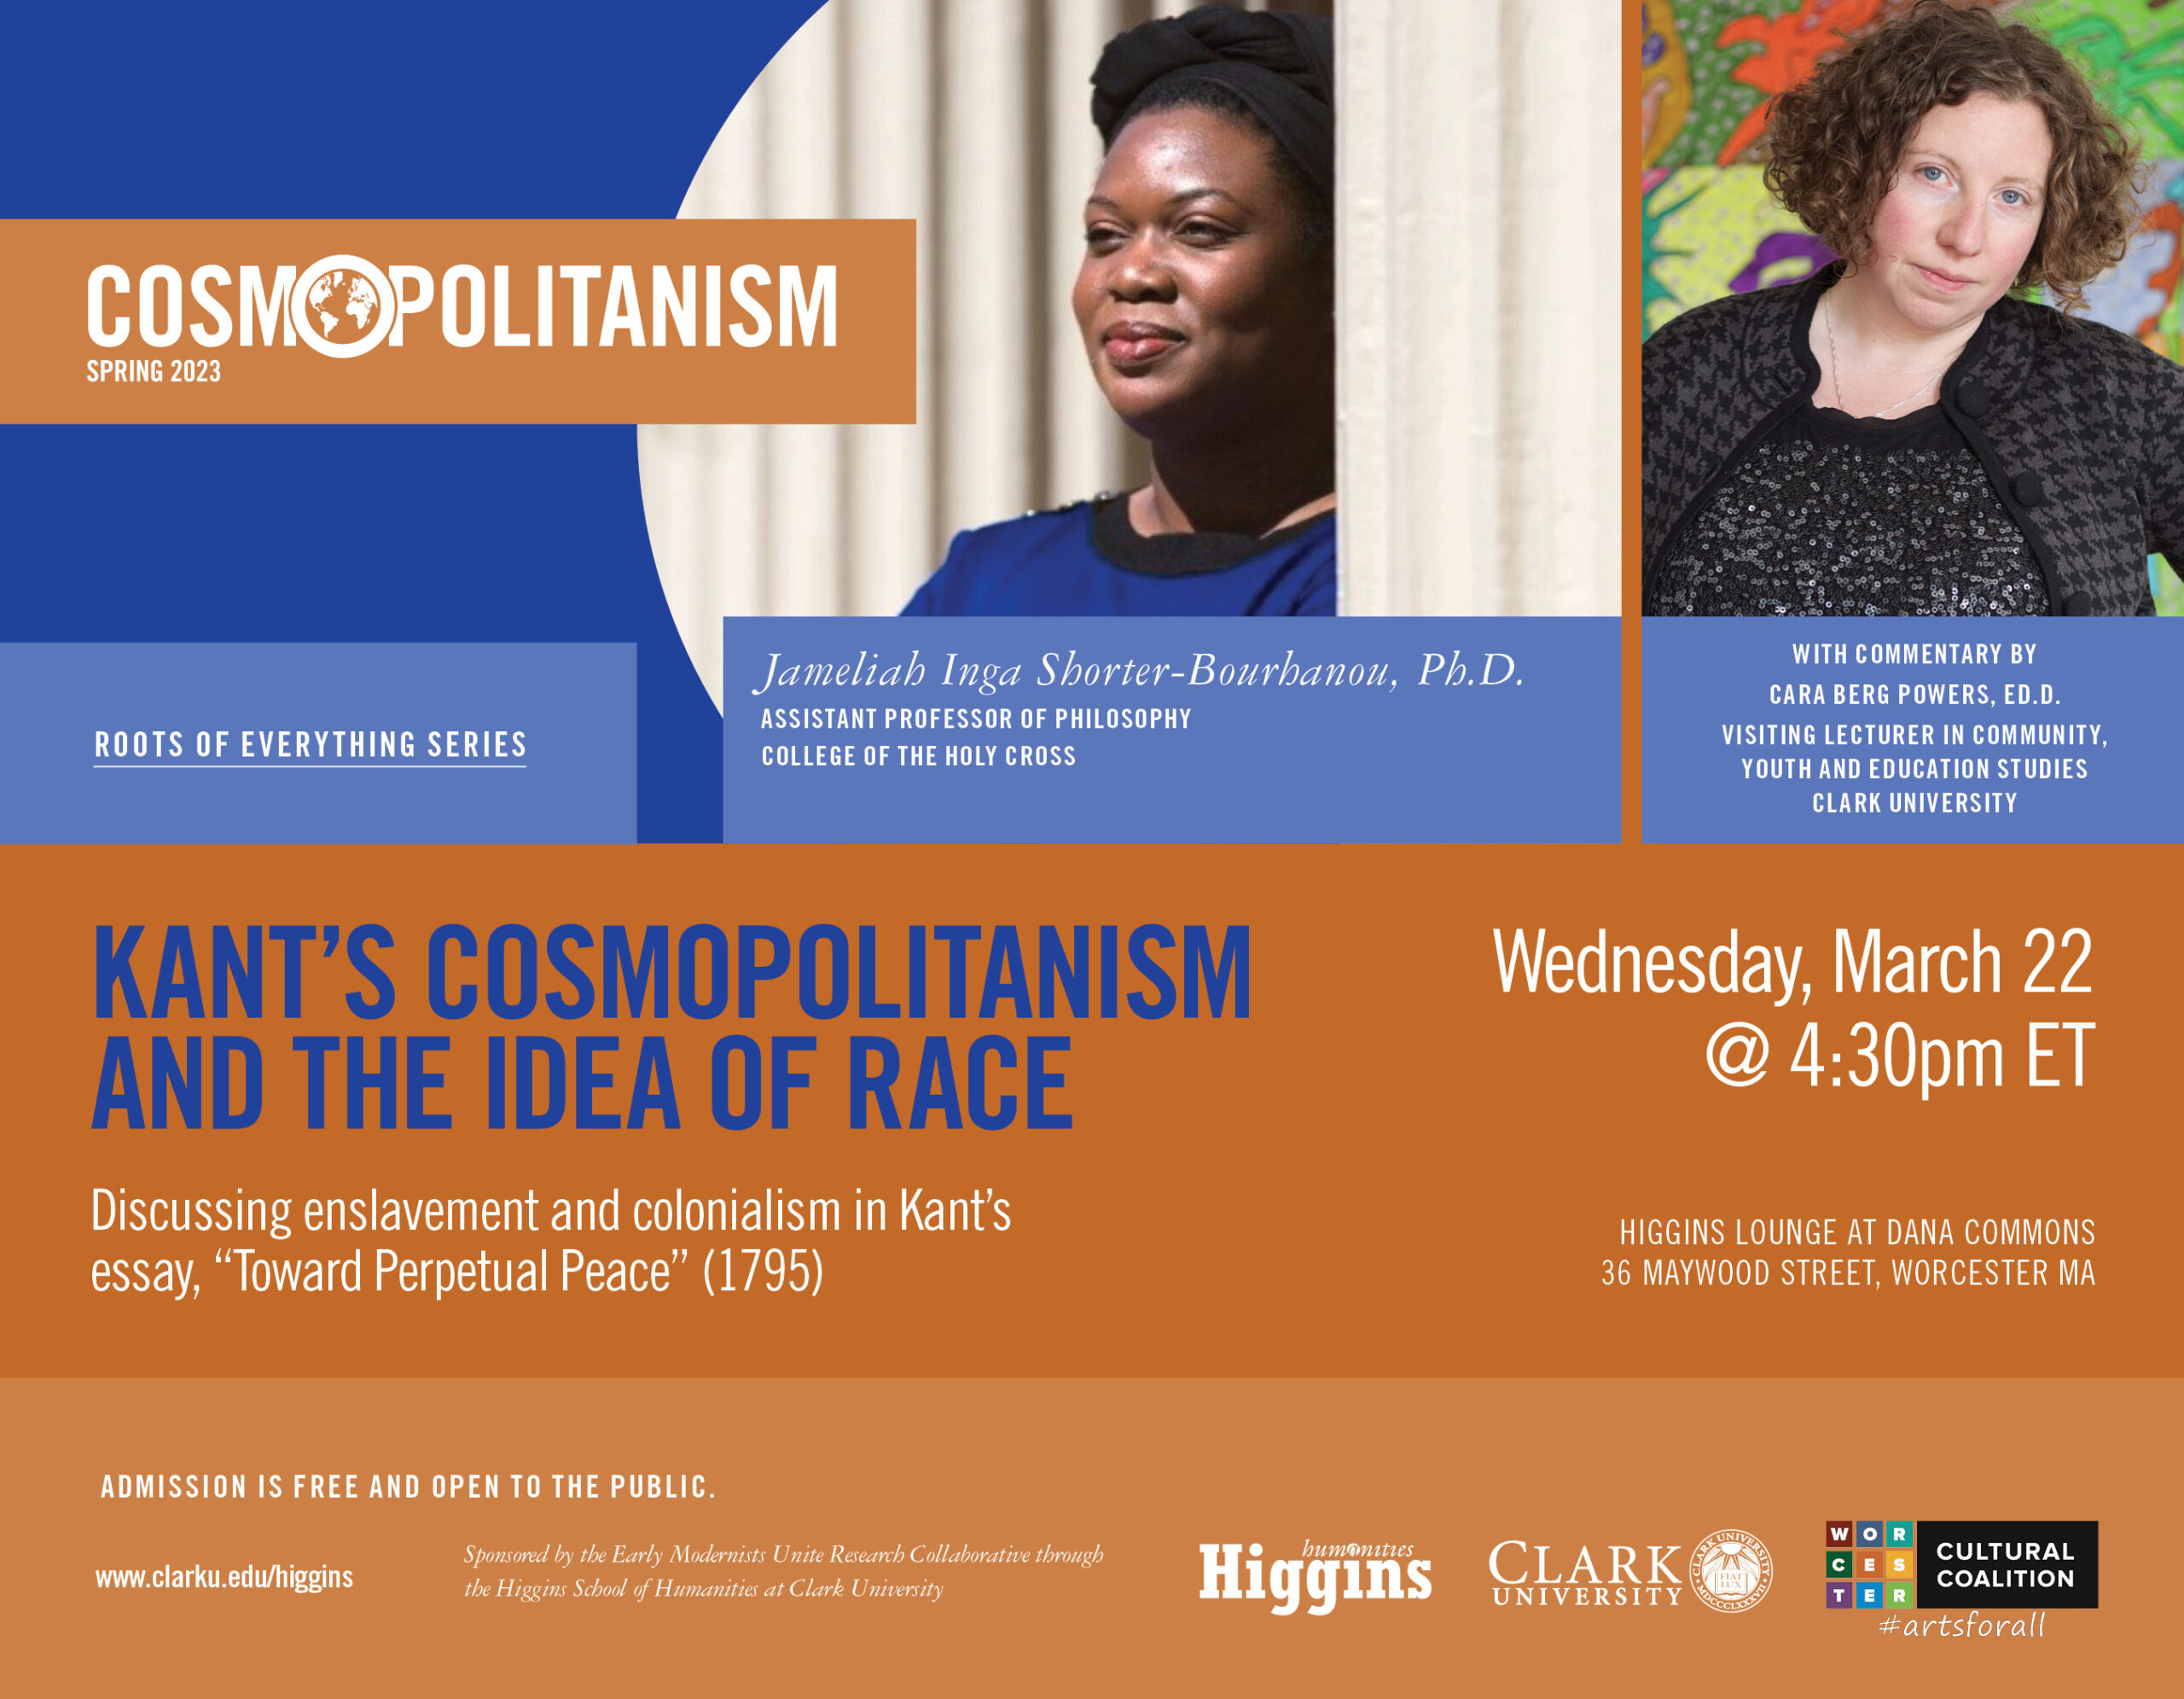 Promotional webcard for Kant's Cosmopolitanism and the Idea of Race